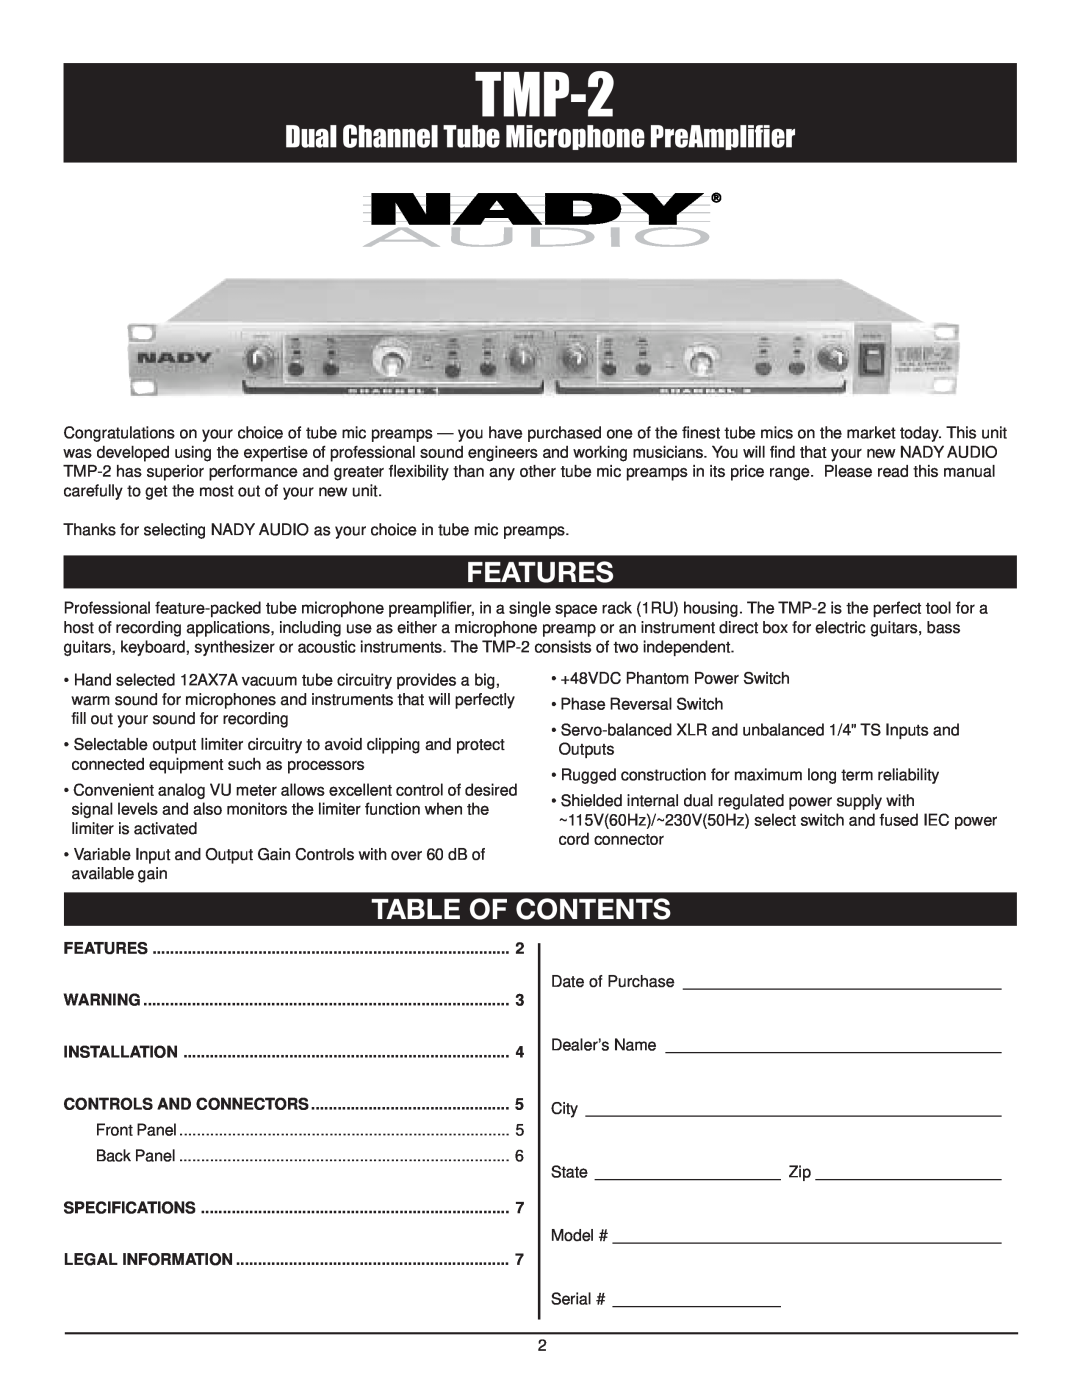 Nady Systems TMP-2 owner manual Features, Table Of Contents, Dual Channel Tube Microphone PreAmplifier 